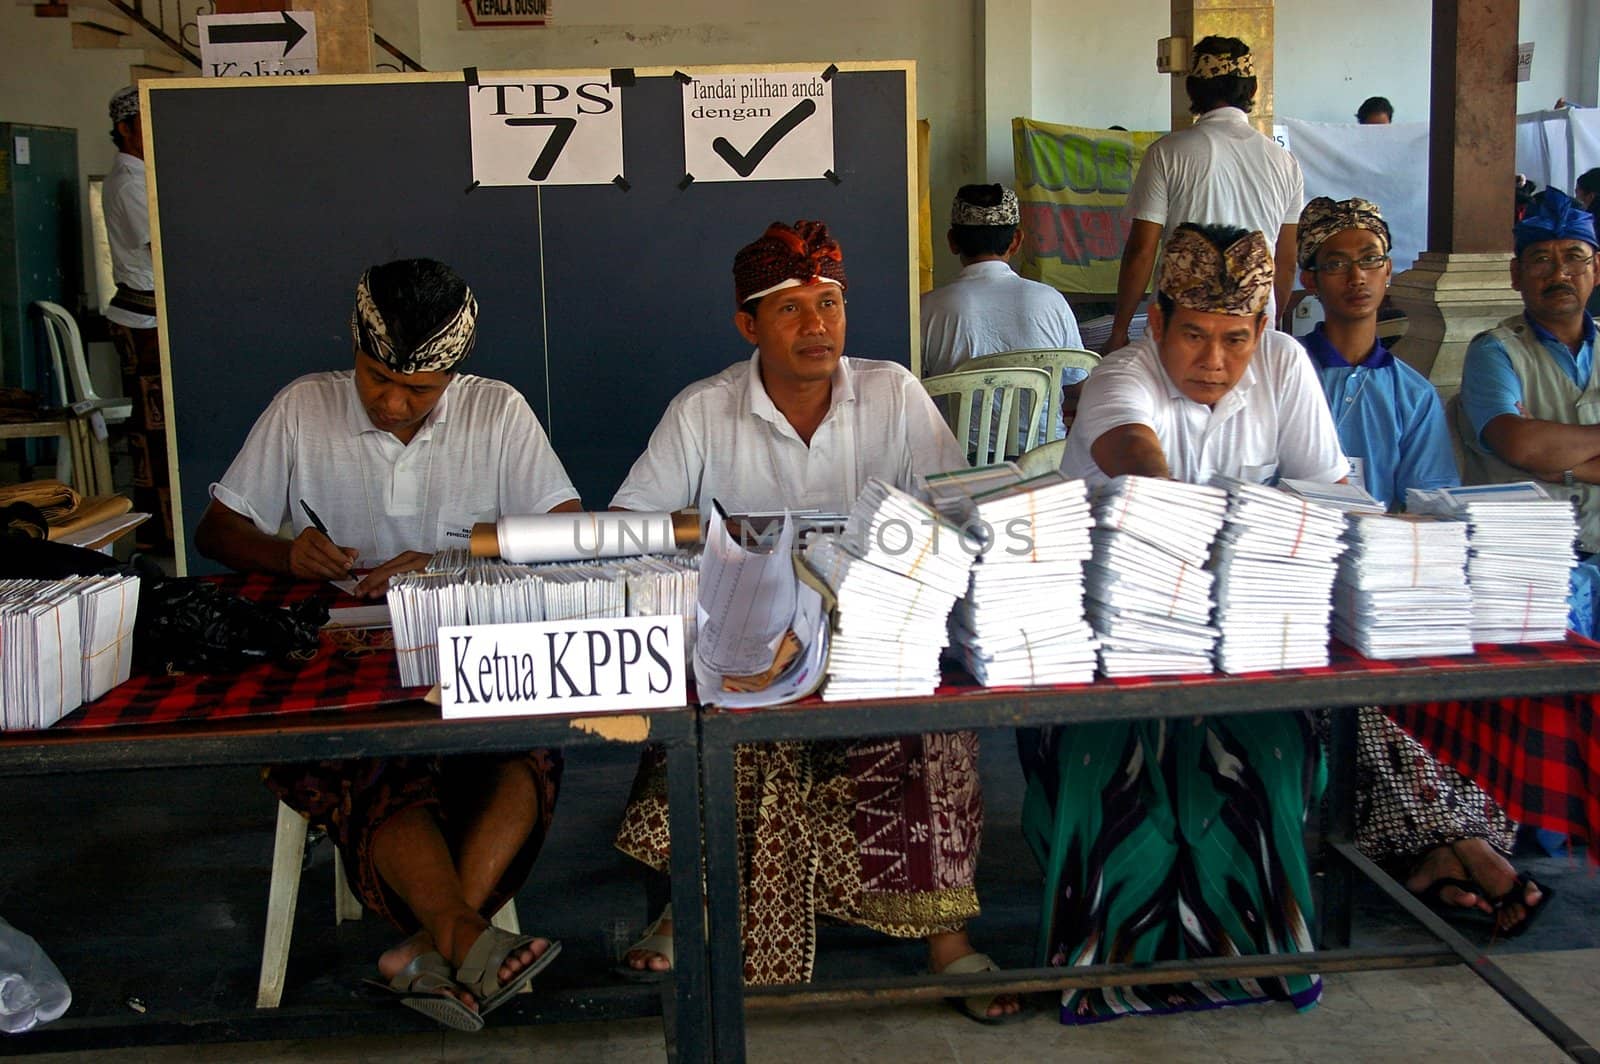 Election officials with ballot papers in a polling station, Denpasar, Bali, April 9, 2009. This is only the second direct election since the fall of the Suharto dictatorship in 1998.